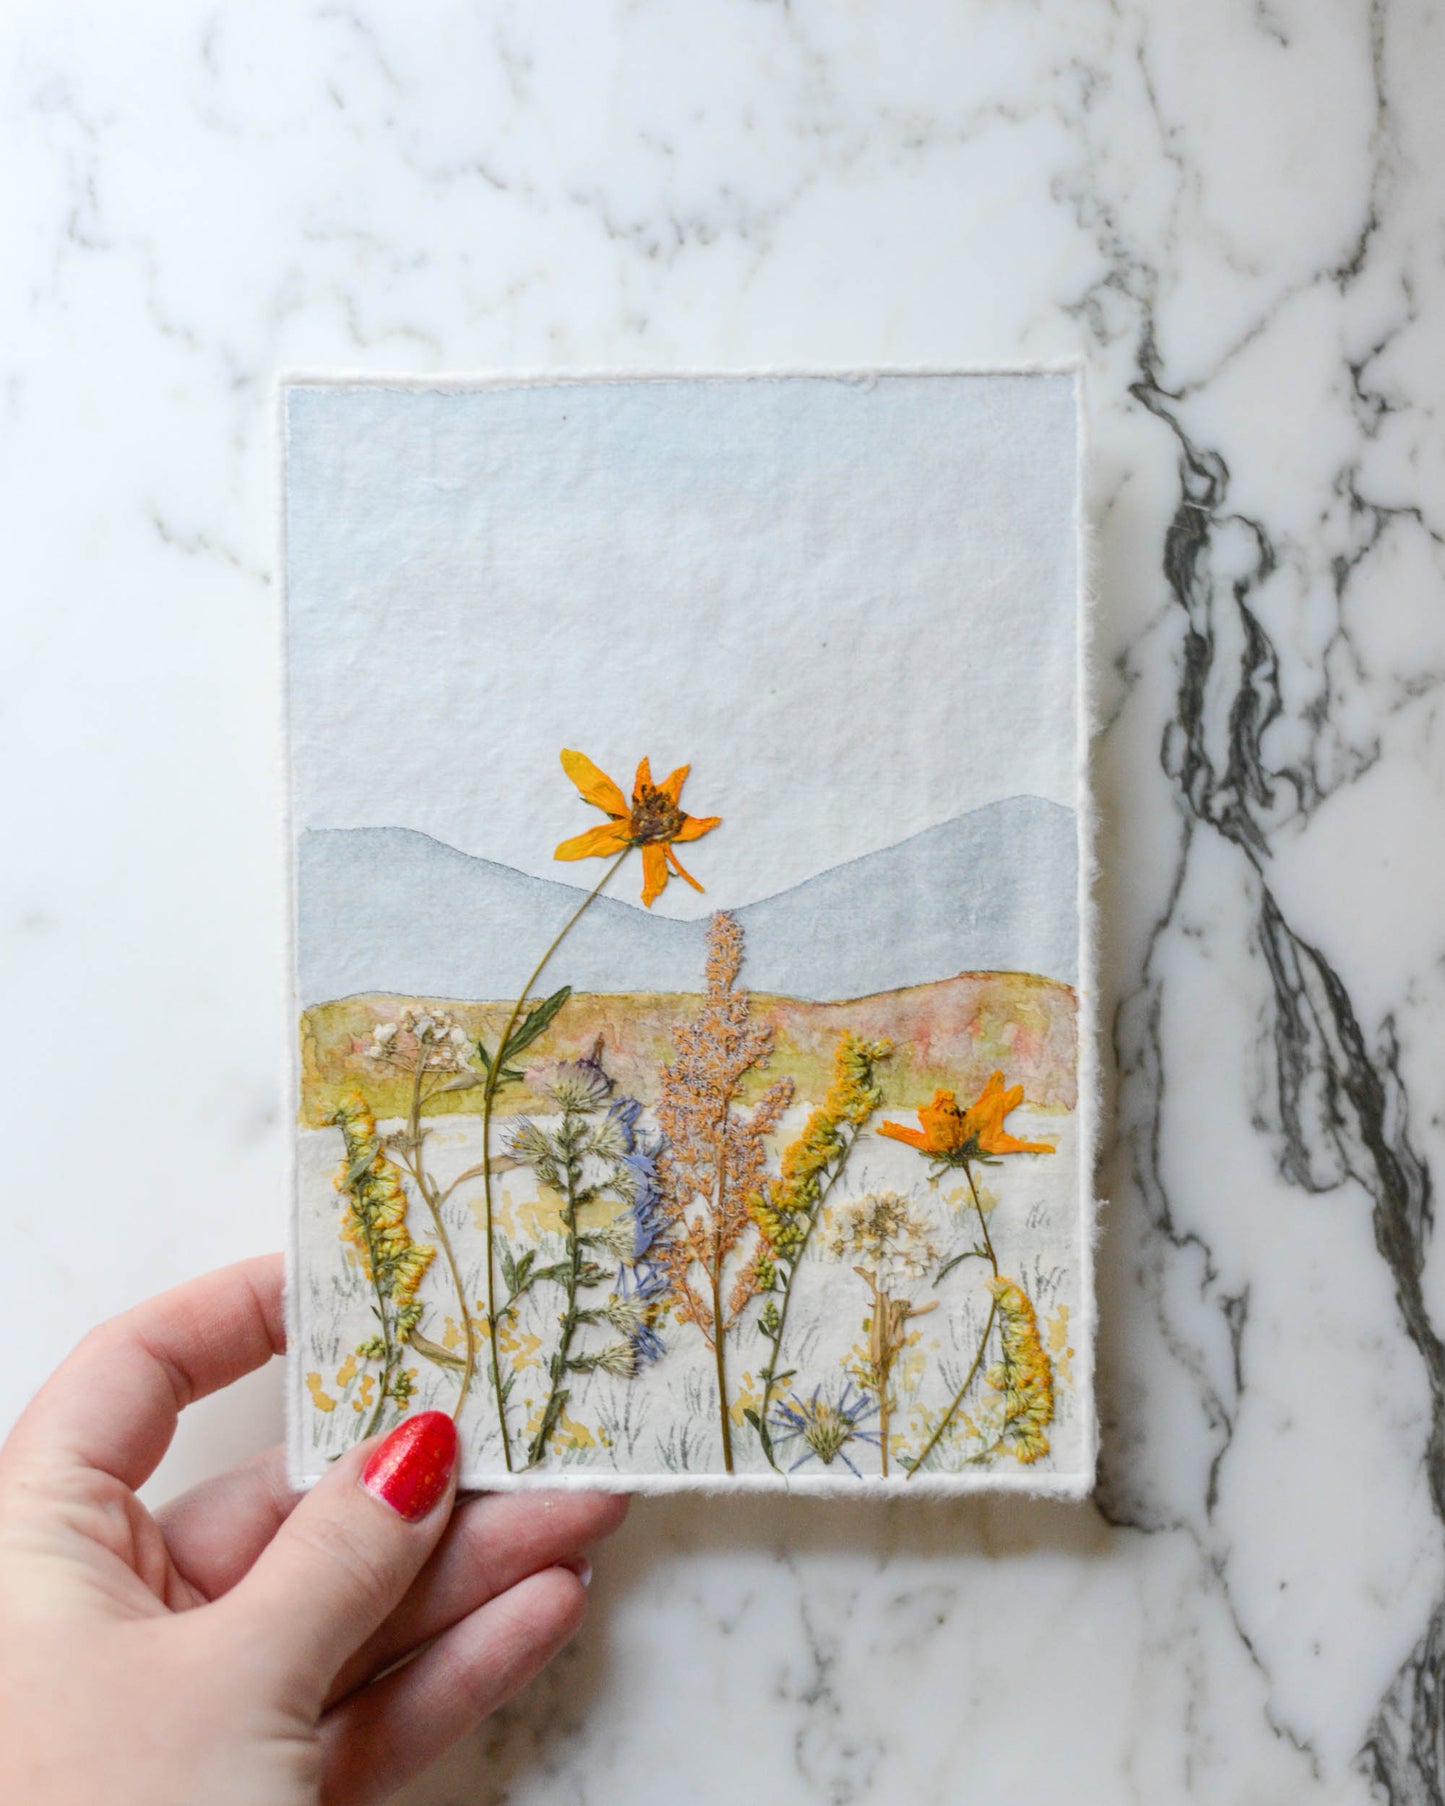 Autumn in the Mountains - Original Artwork, 5x7" Watercolor and Pressed Flowers